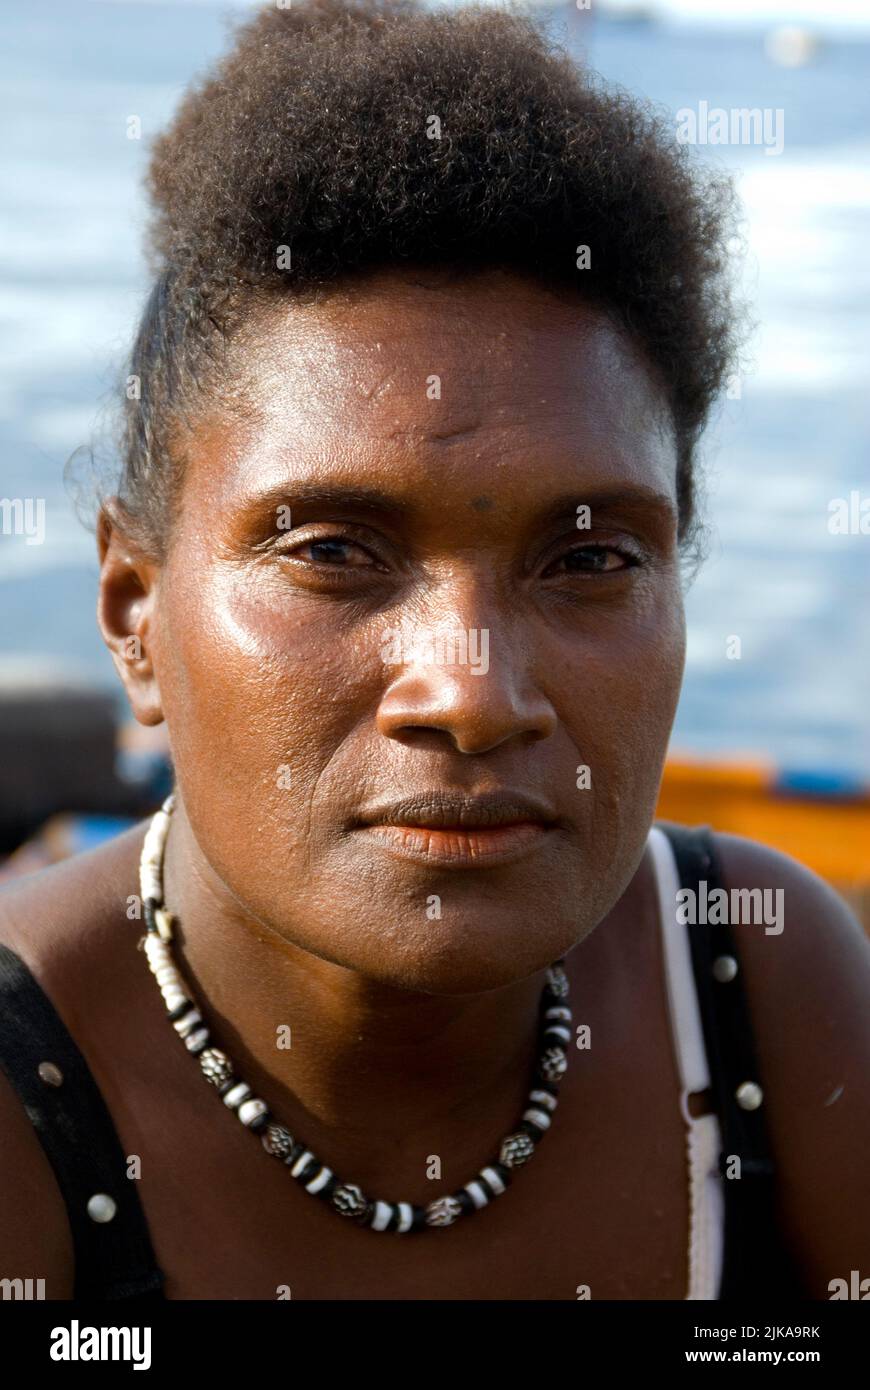 Woman at the central market in Honiara, Guadalcanal, Solomon Islands Stock Photo